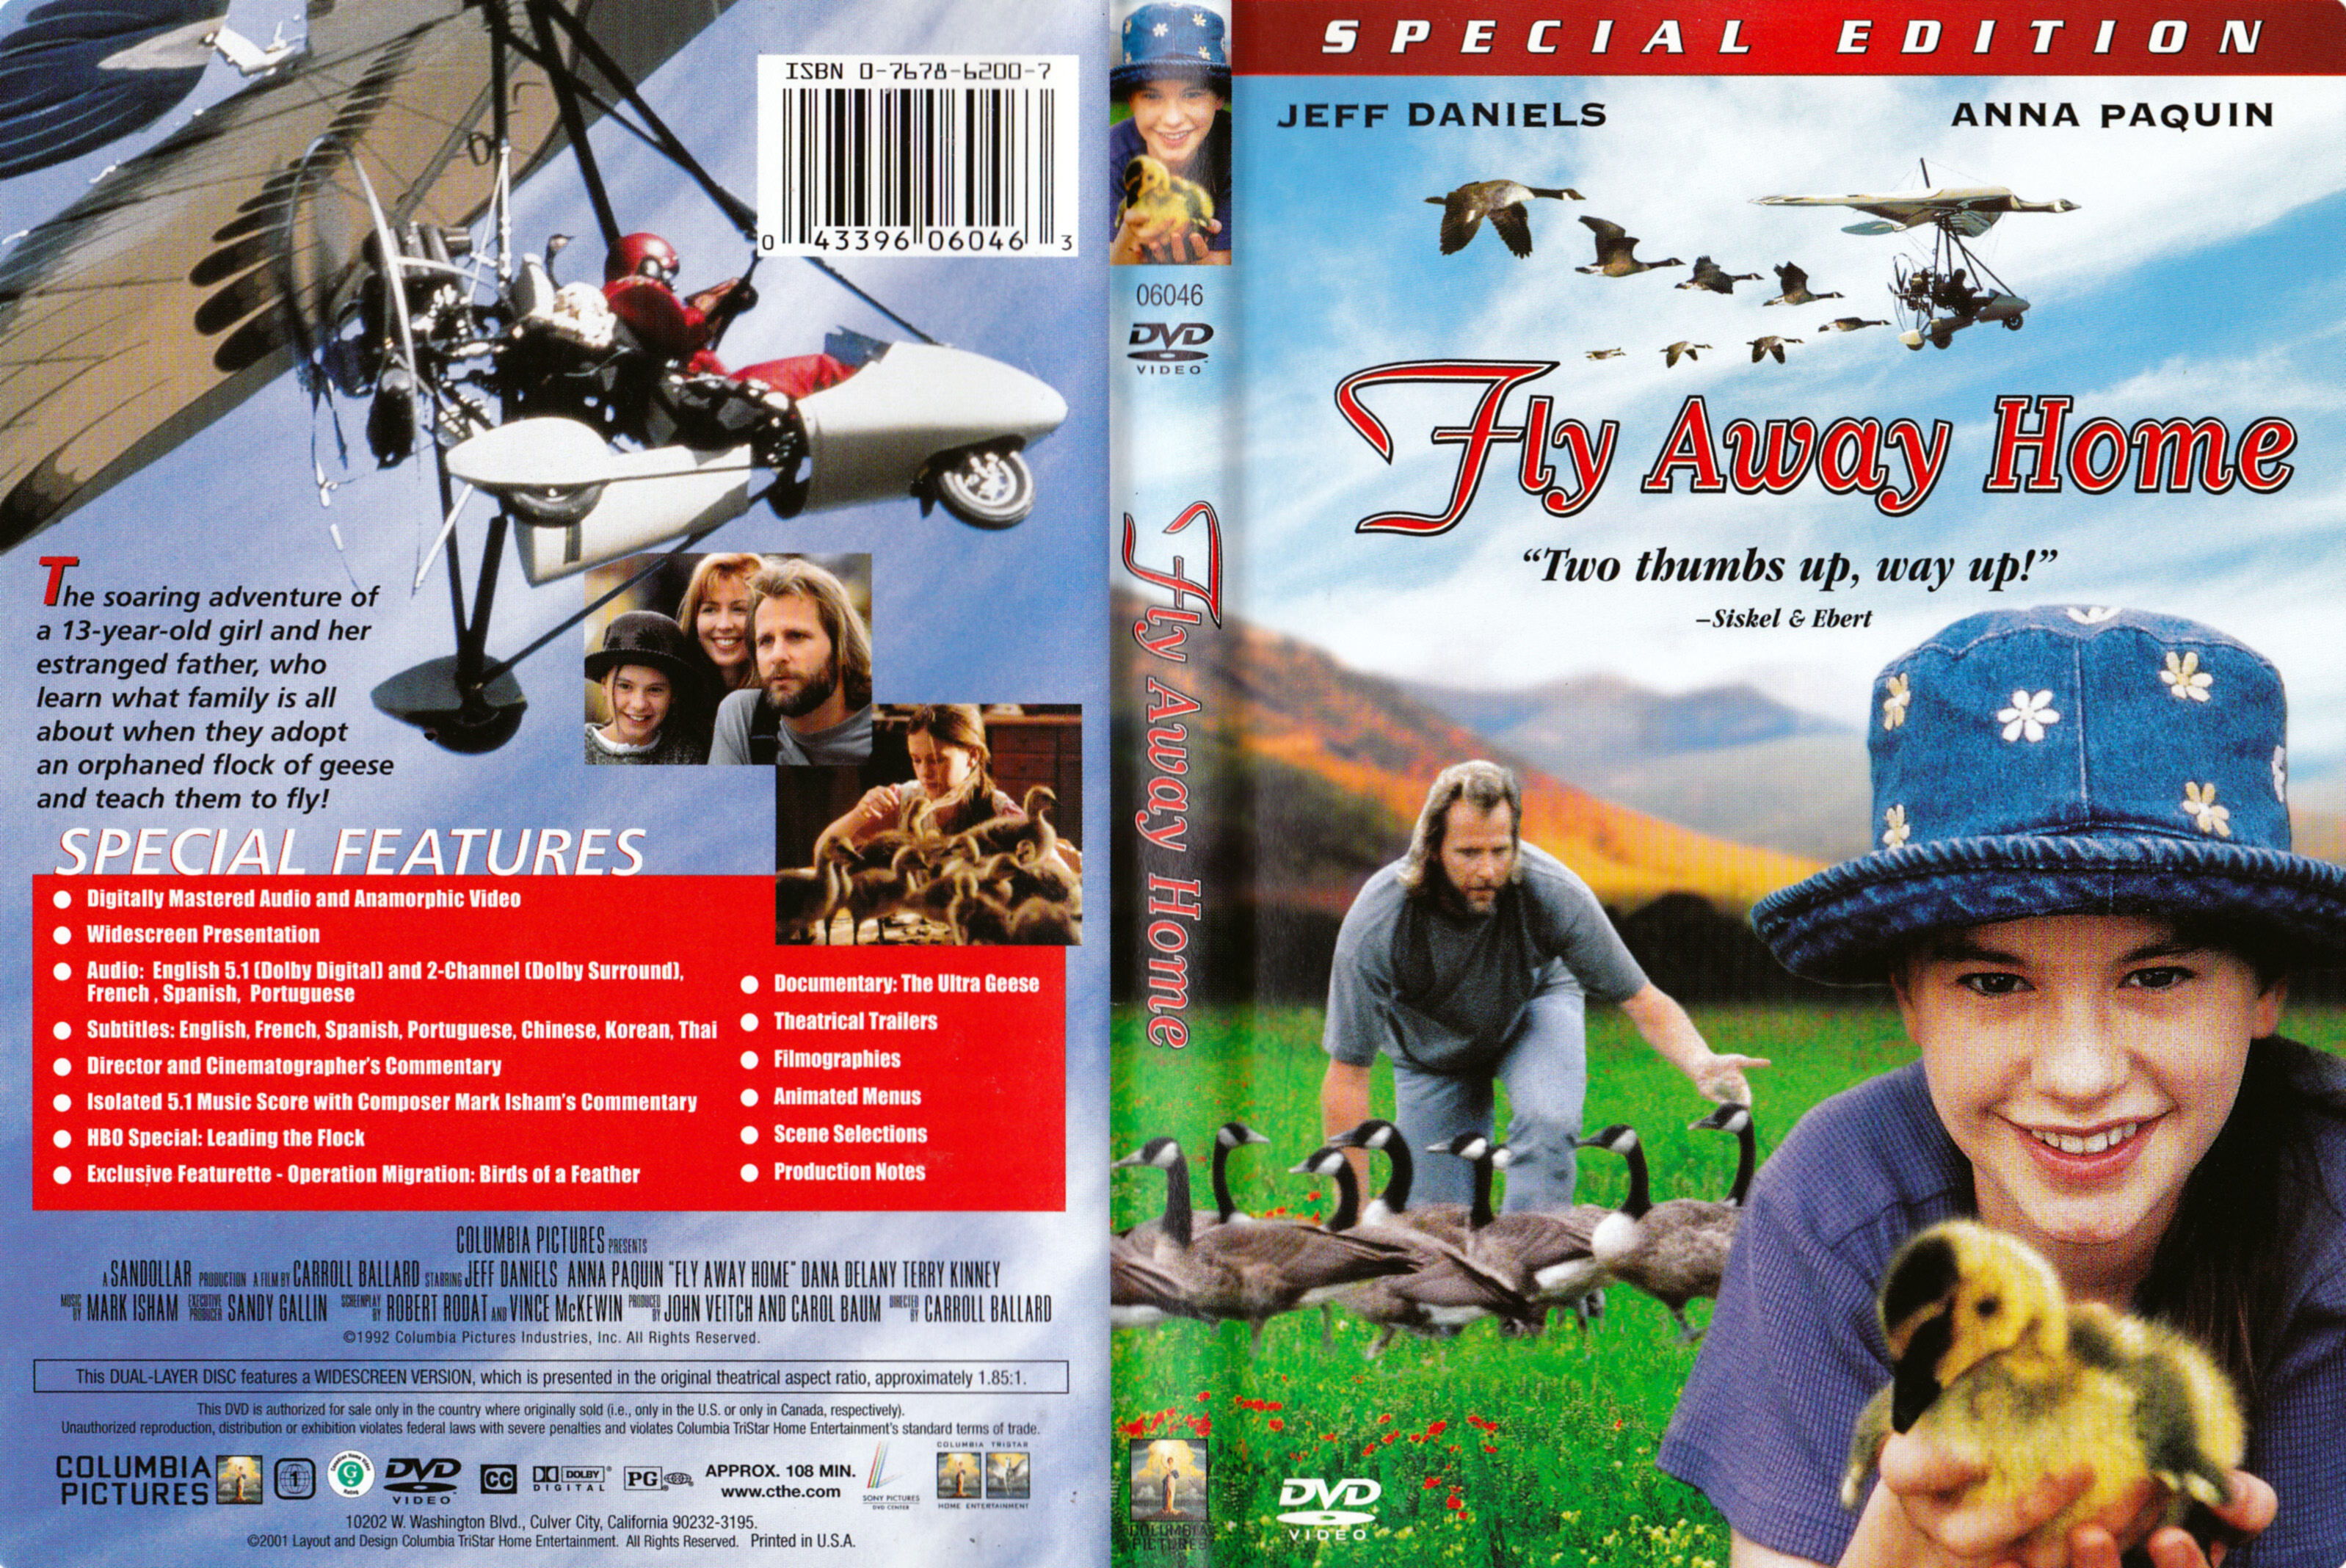 Jaquette DVD Fly away home (Canadienne)